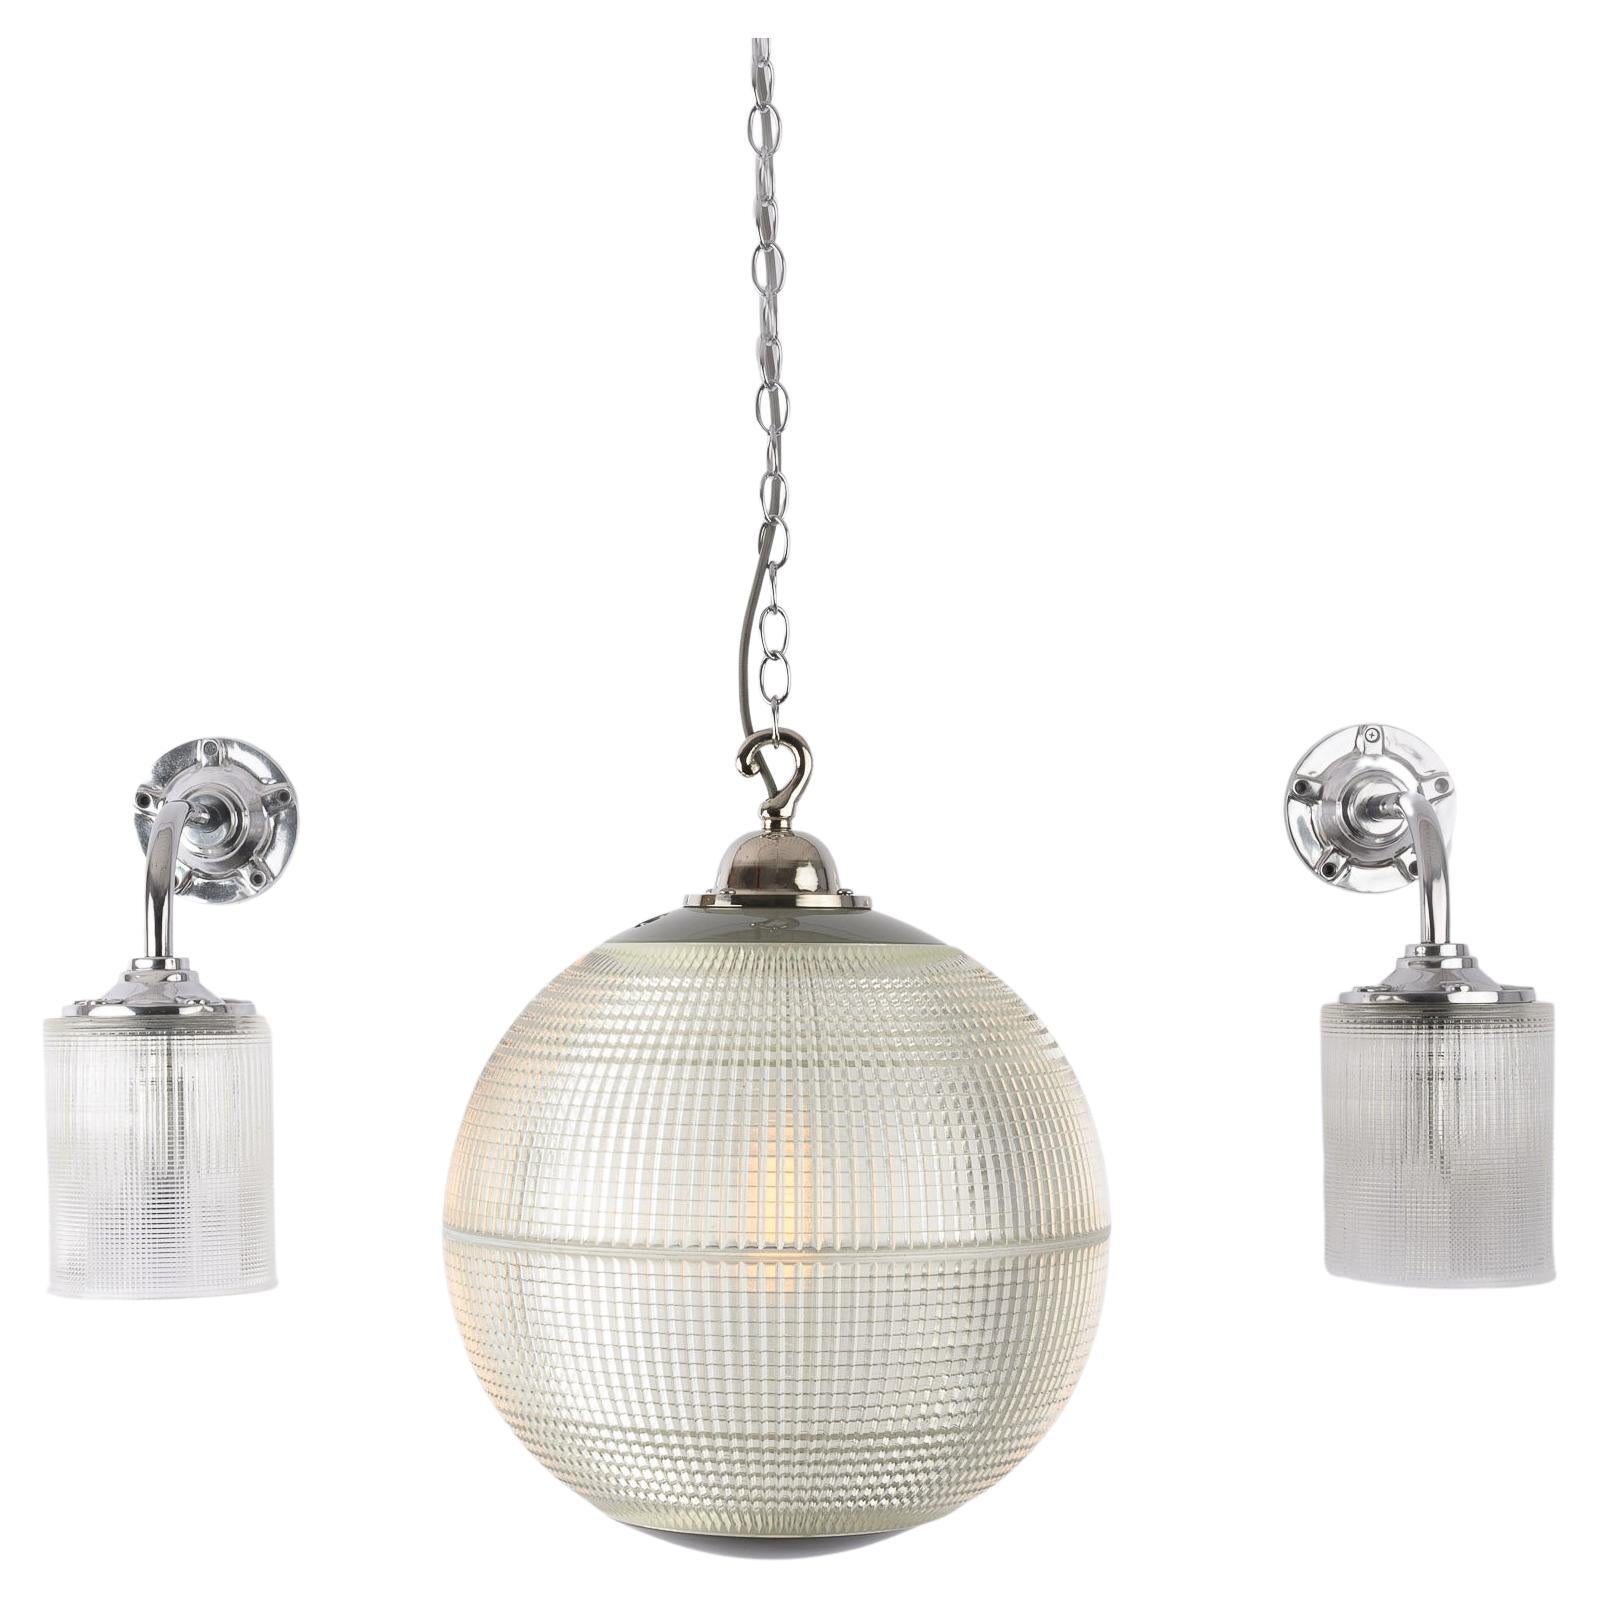 Price is per light.

A stunning run of reclaimed vintage prismatic glass globes made in France circa 1960 by Holophane.

Previously used to illuminate the streets of Paris at its surrounding districts.

The globes have been adapted into a